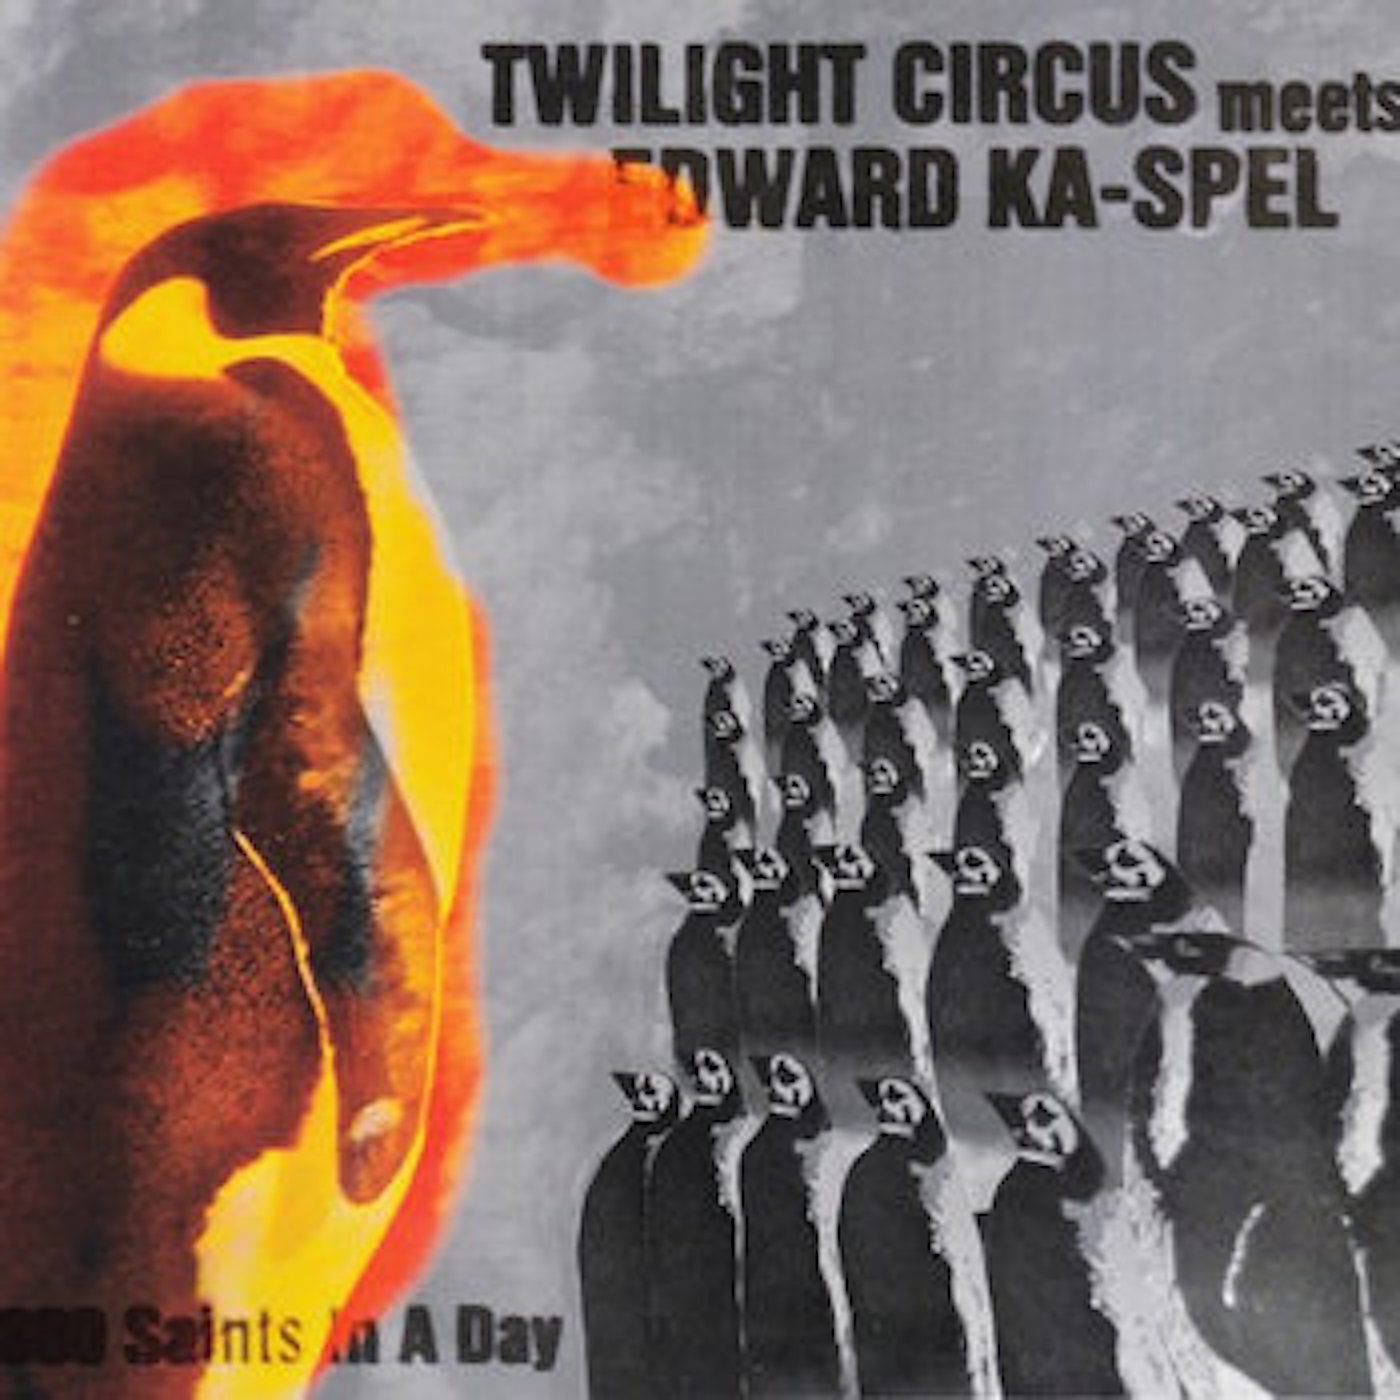 Twilight Circus Meets Edward Ka-Spel - 800 Saints In A Day (Enhanced and Expanded Edition) (2013/2018) [FLAC 24bit/44,1kHz]